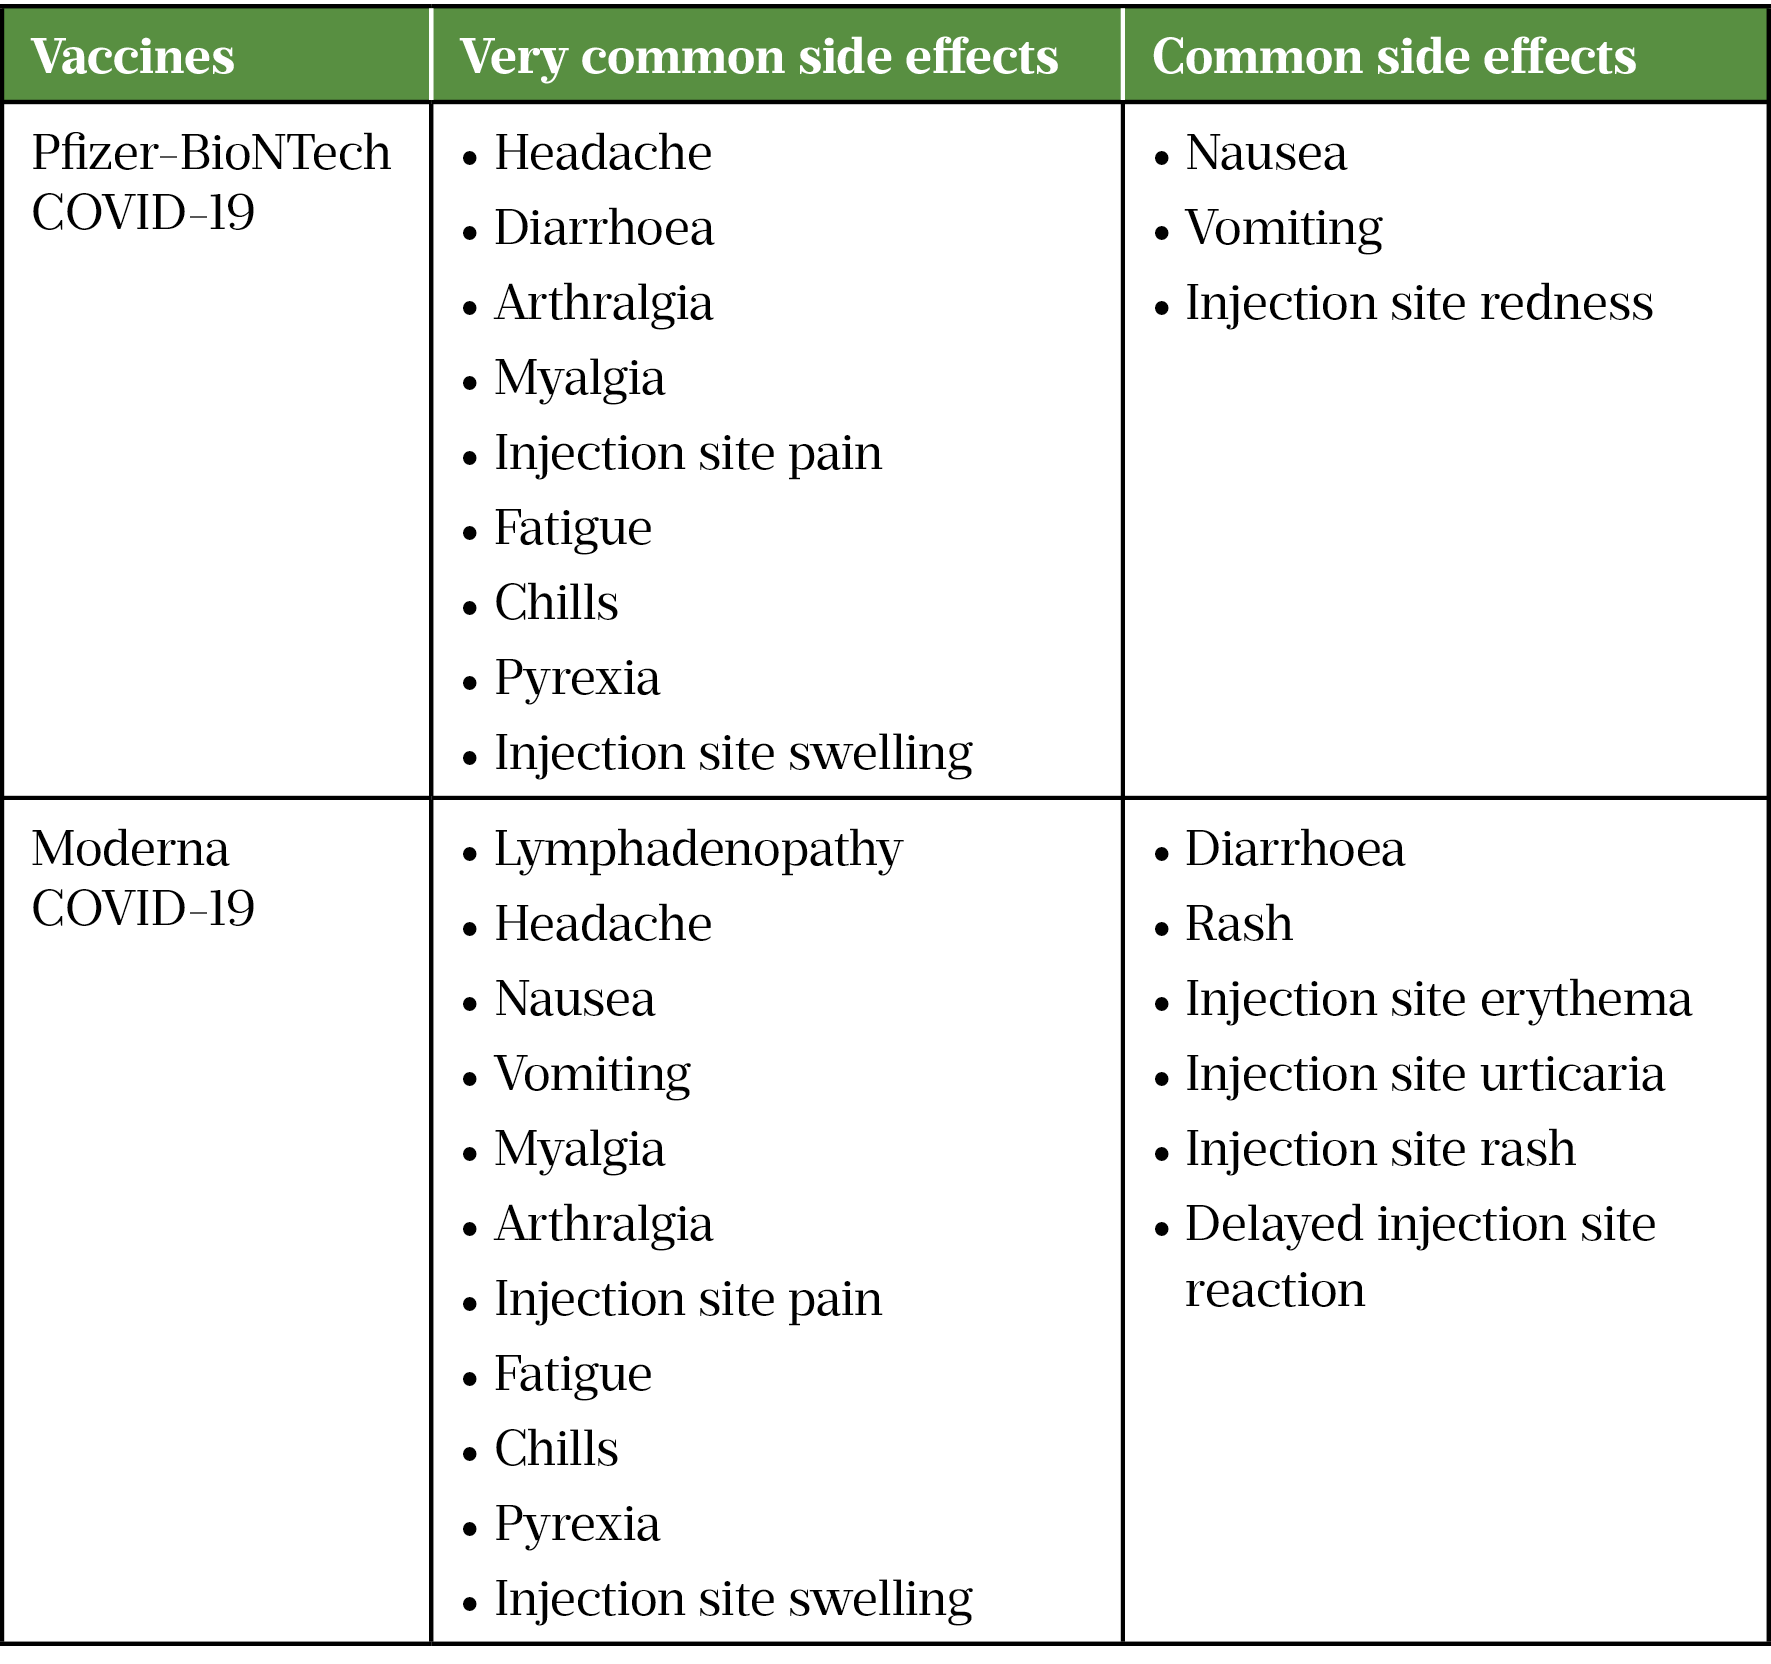 table 3: Very common and common side effects of COVID-19 mRNA vaccines